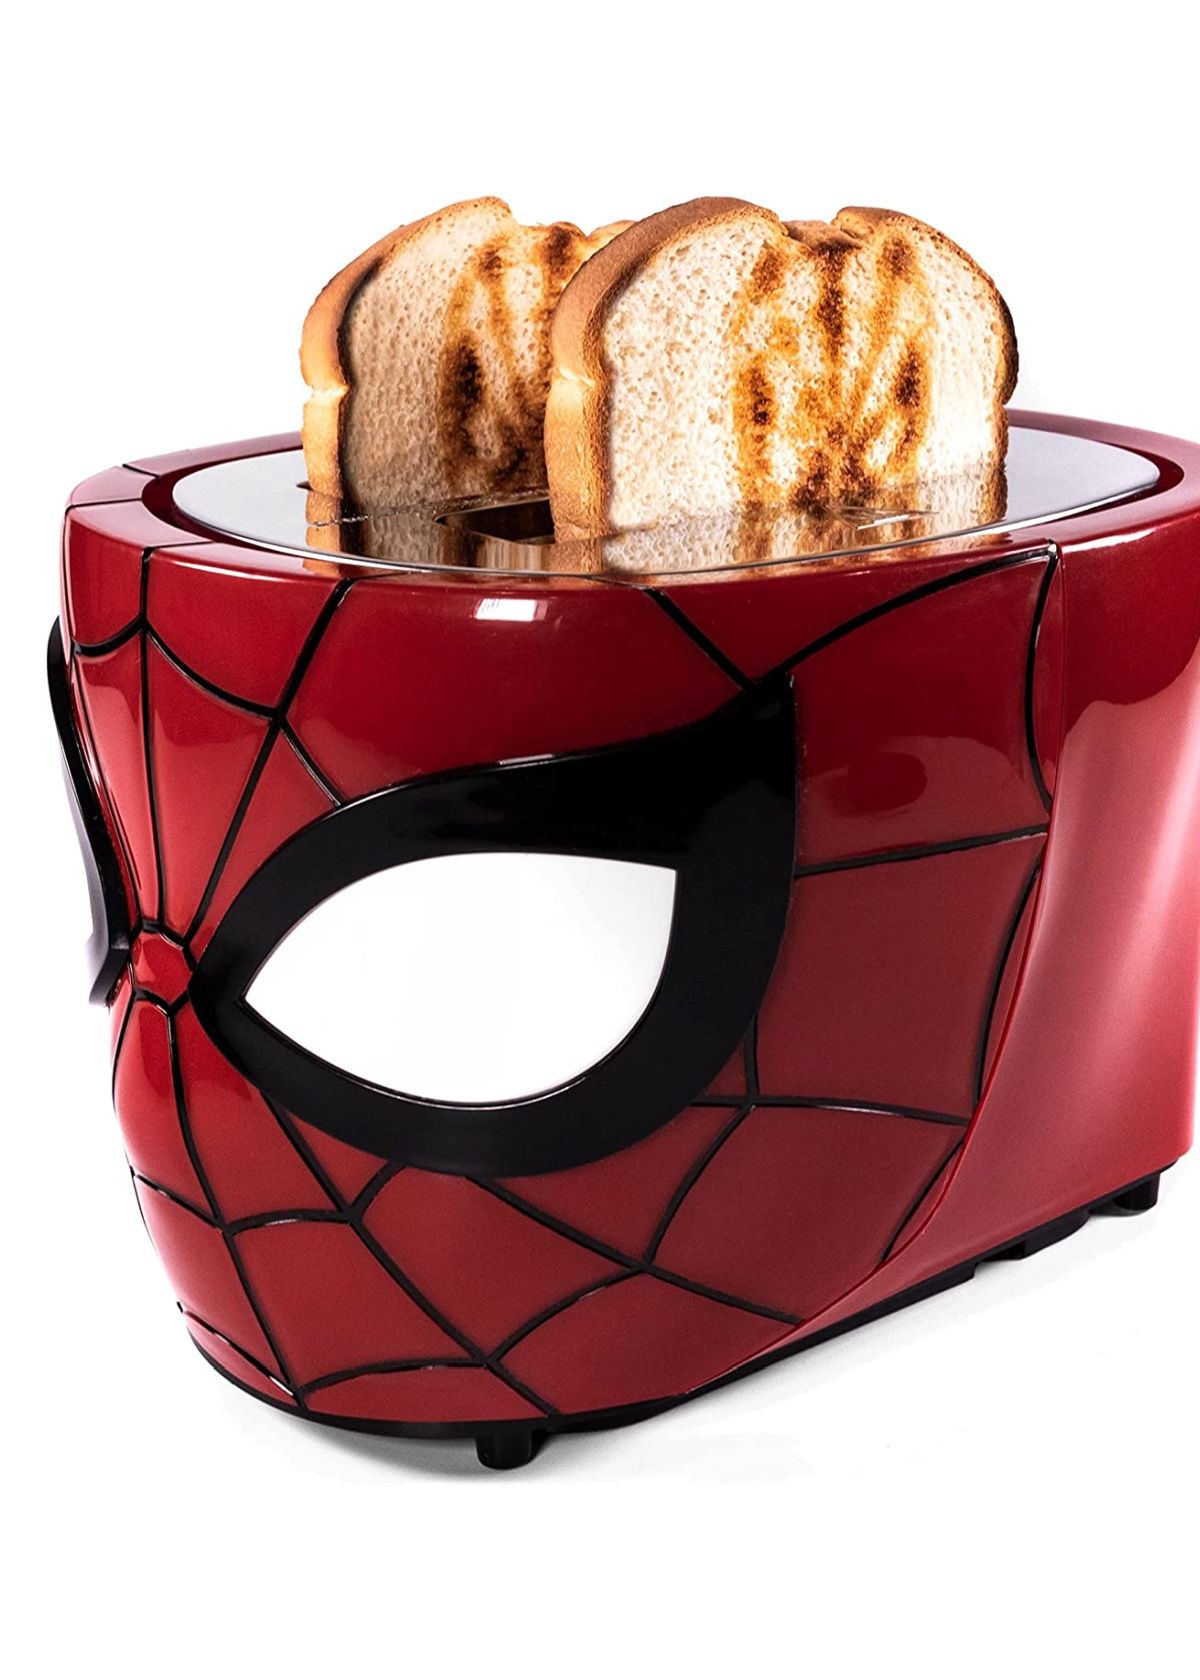 Get Ready For Your Daily Adventures With These Coolest Toasters